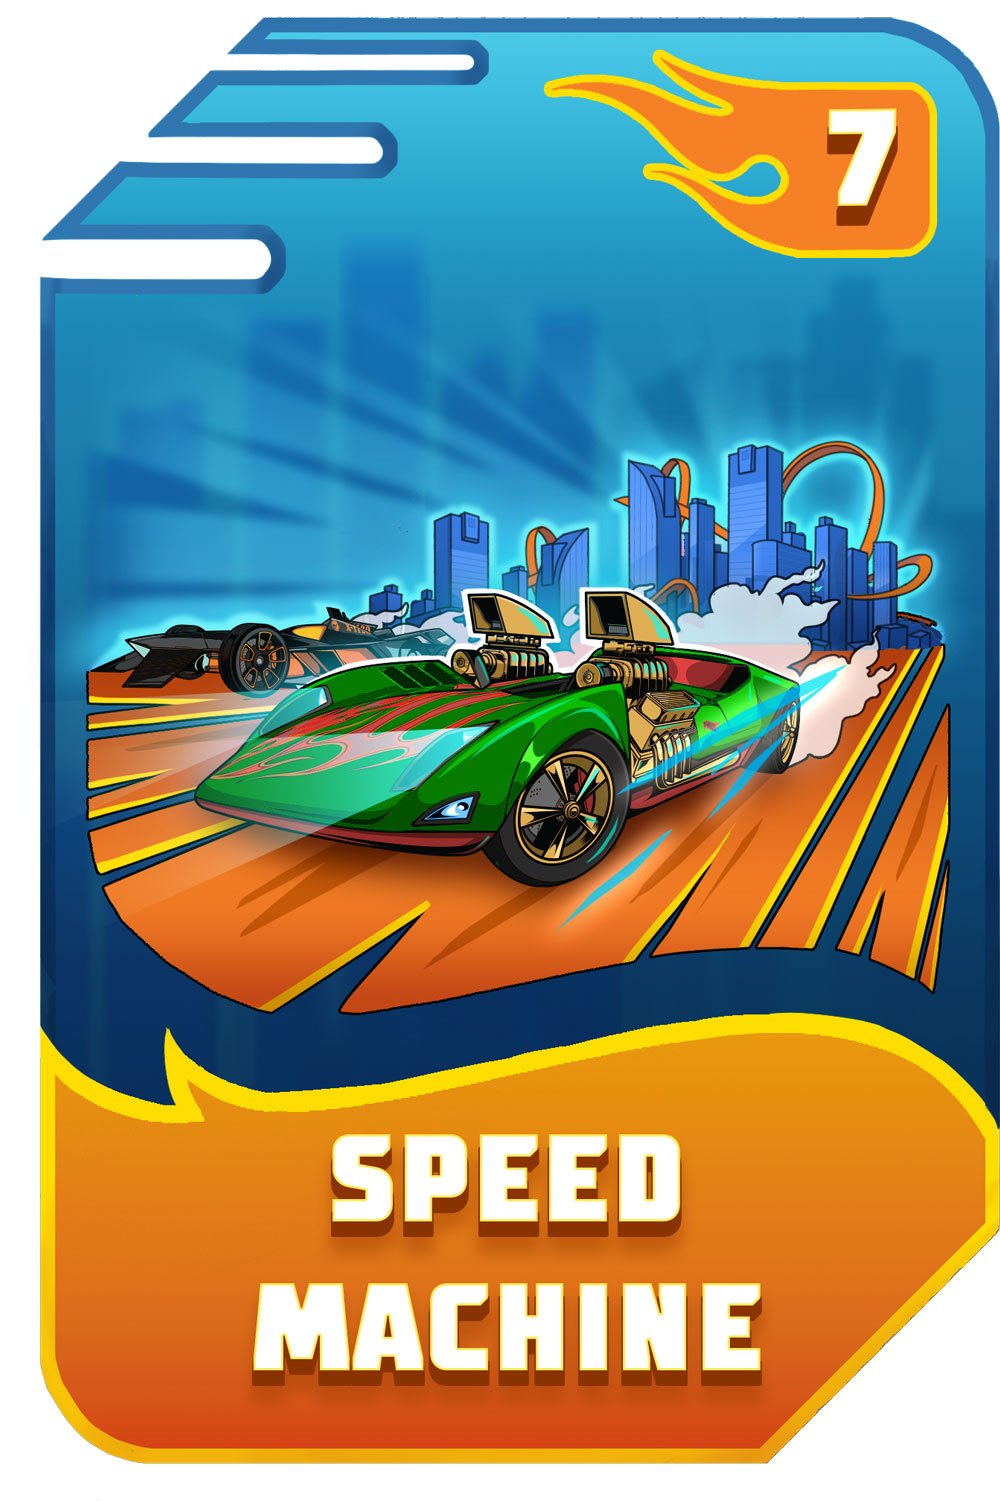 An example of an exclusive digital badge at Hot Wheels Champion Experience